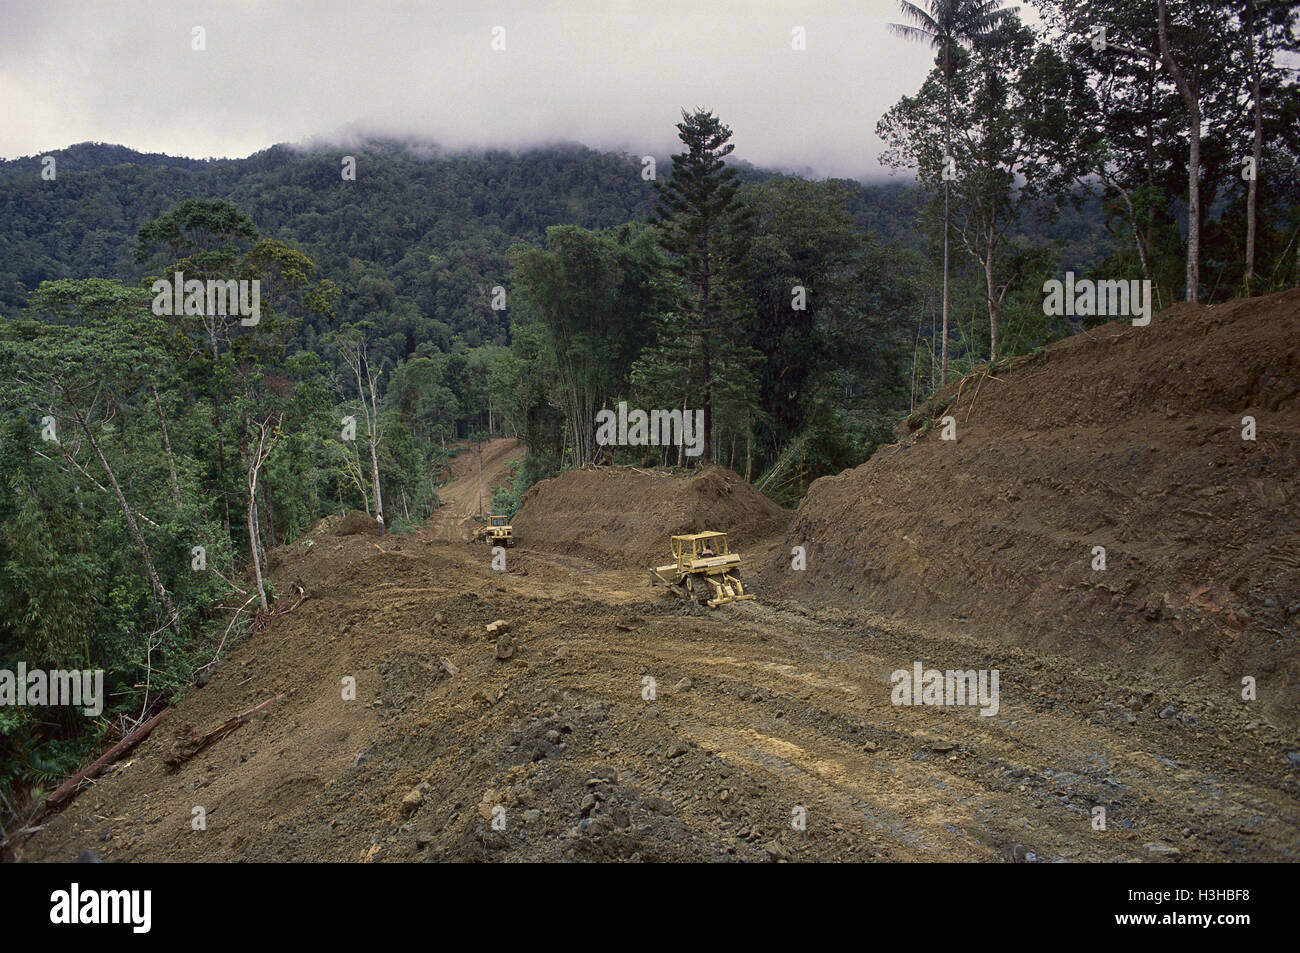 Clearing rainforest for logging industry, Stock Photo